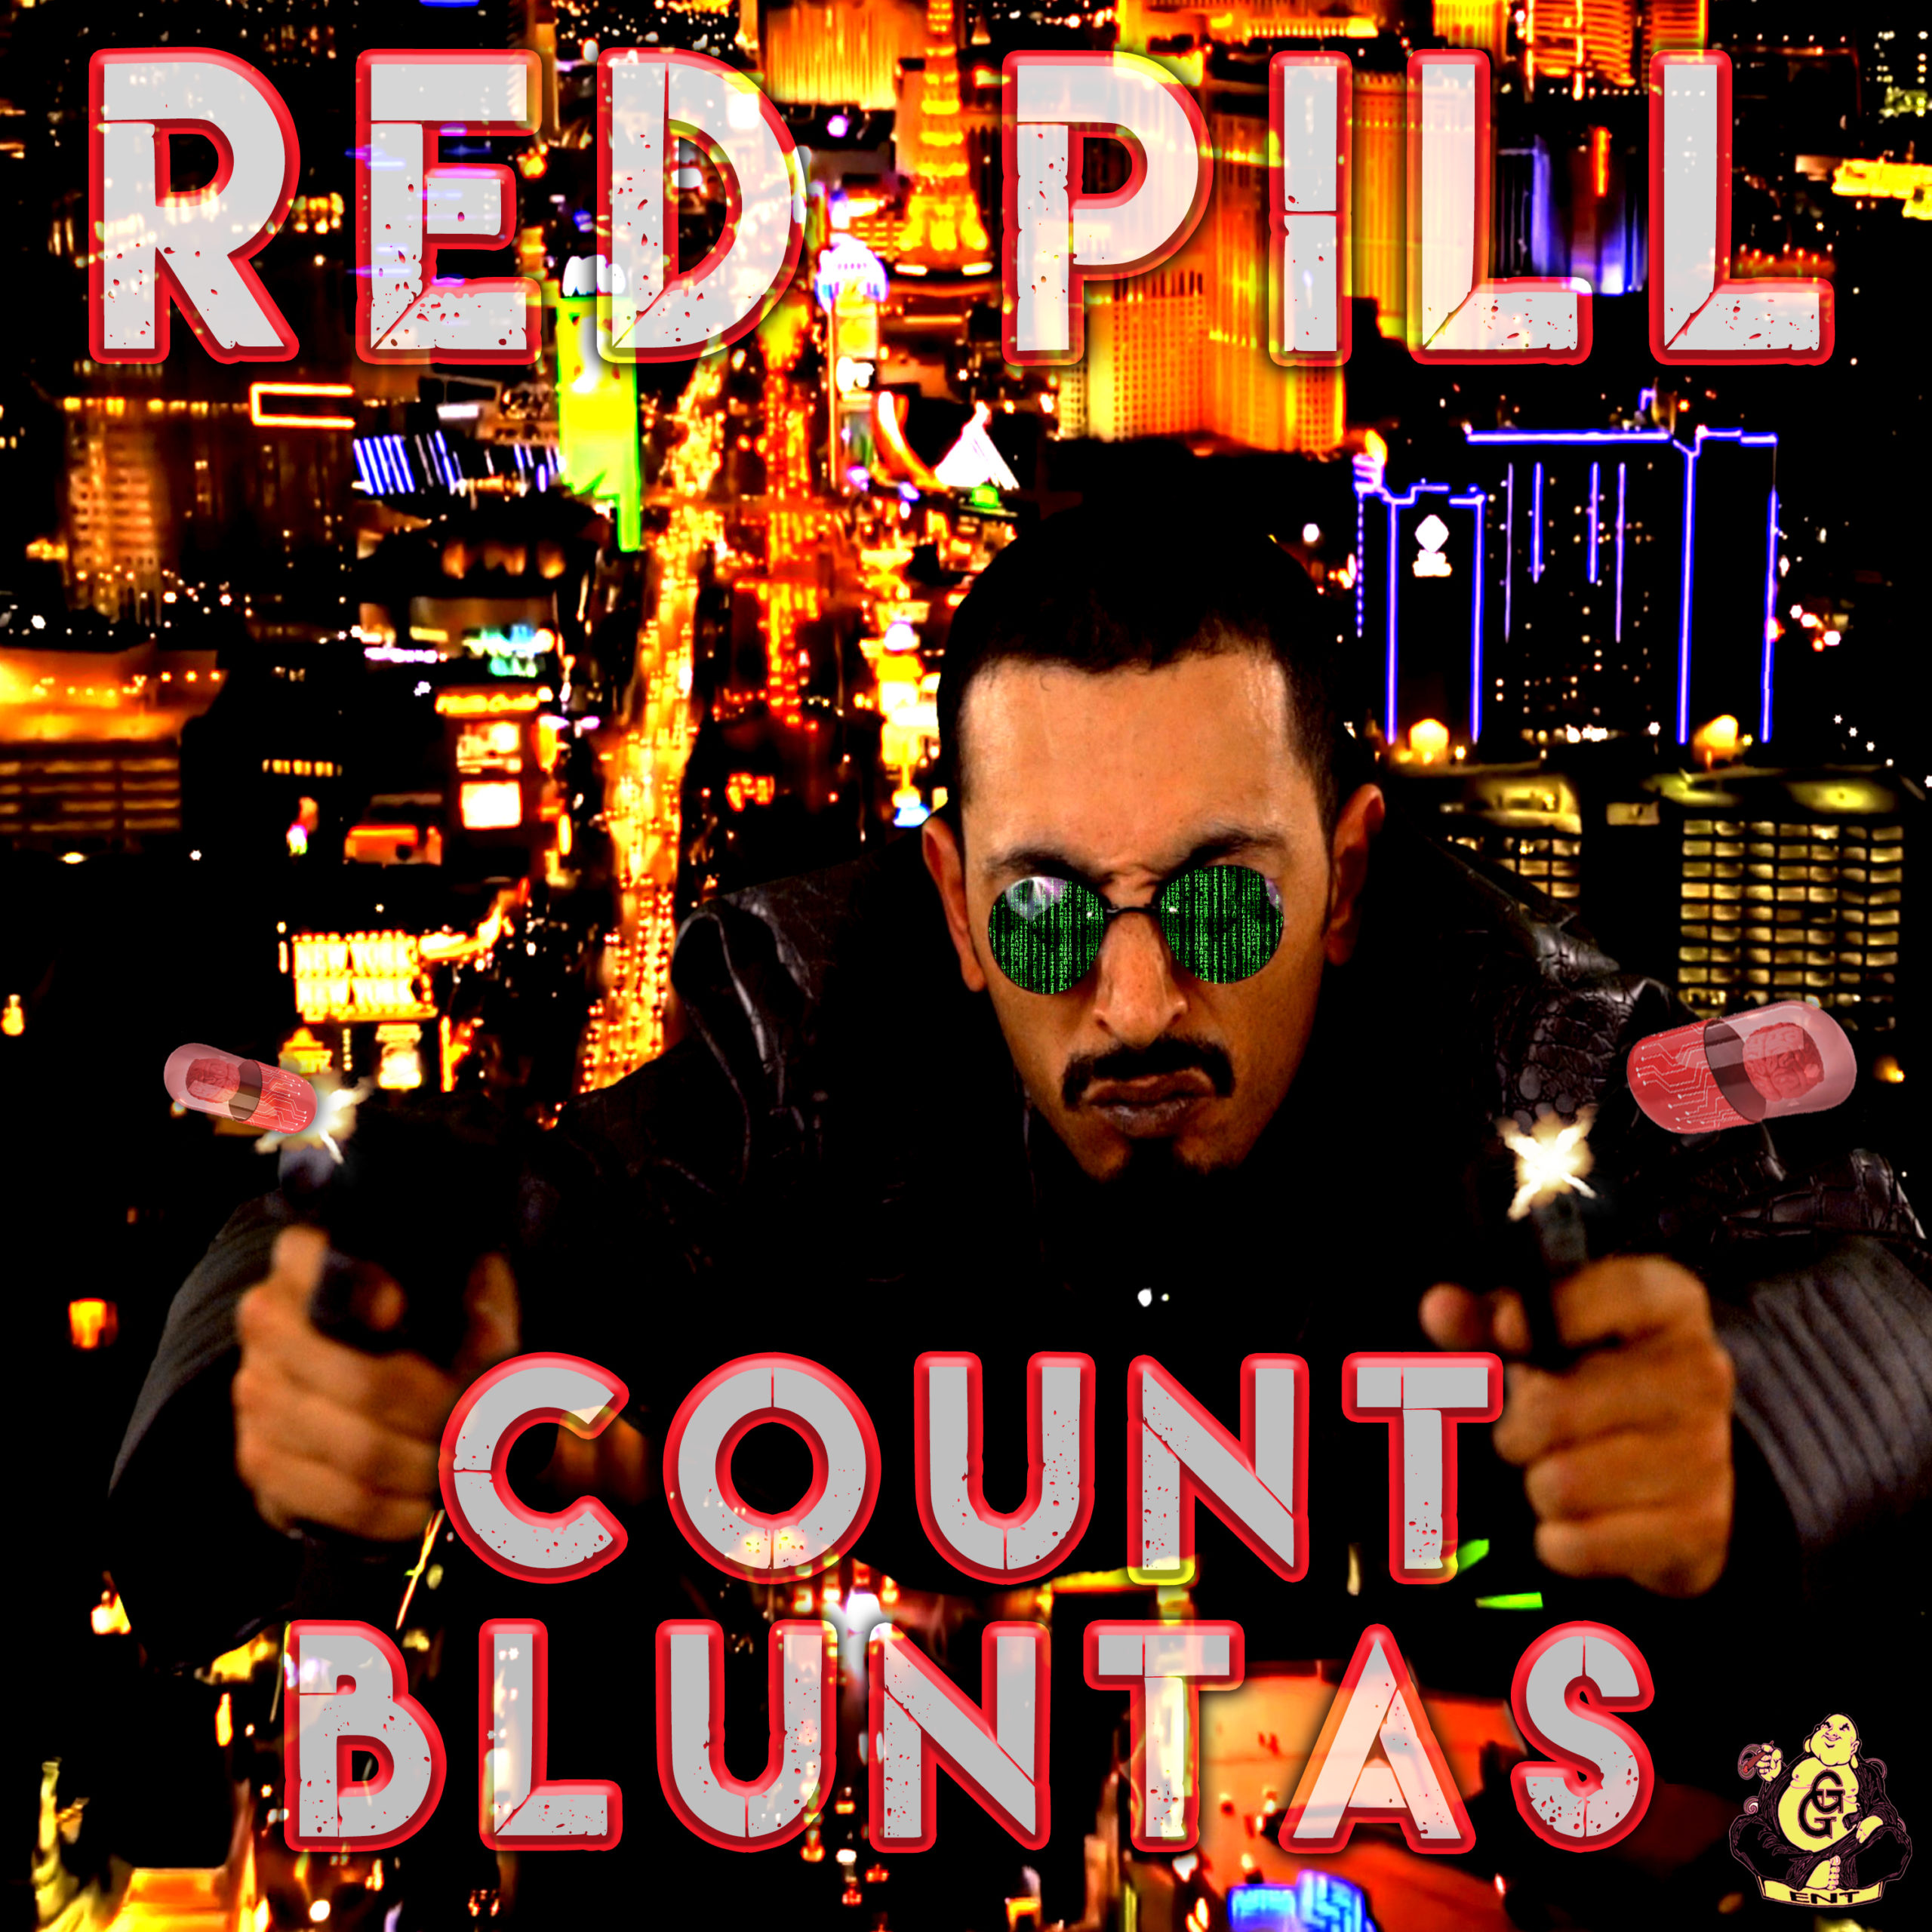 Count Bluntas is Dropping The “Red Pill” Single and Video Soon